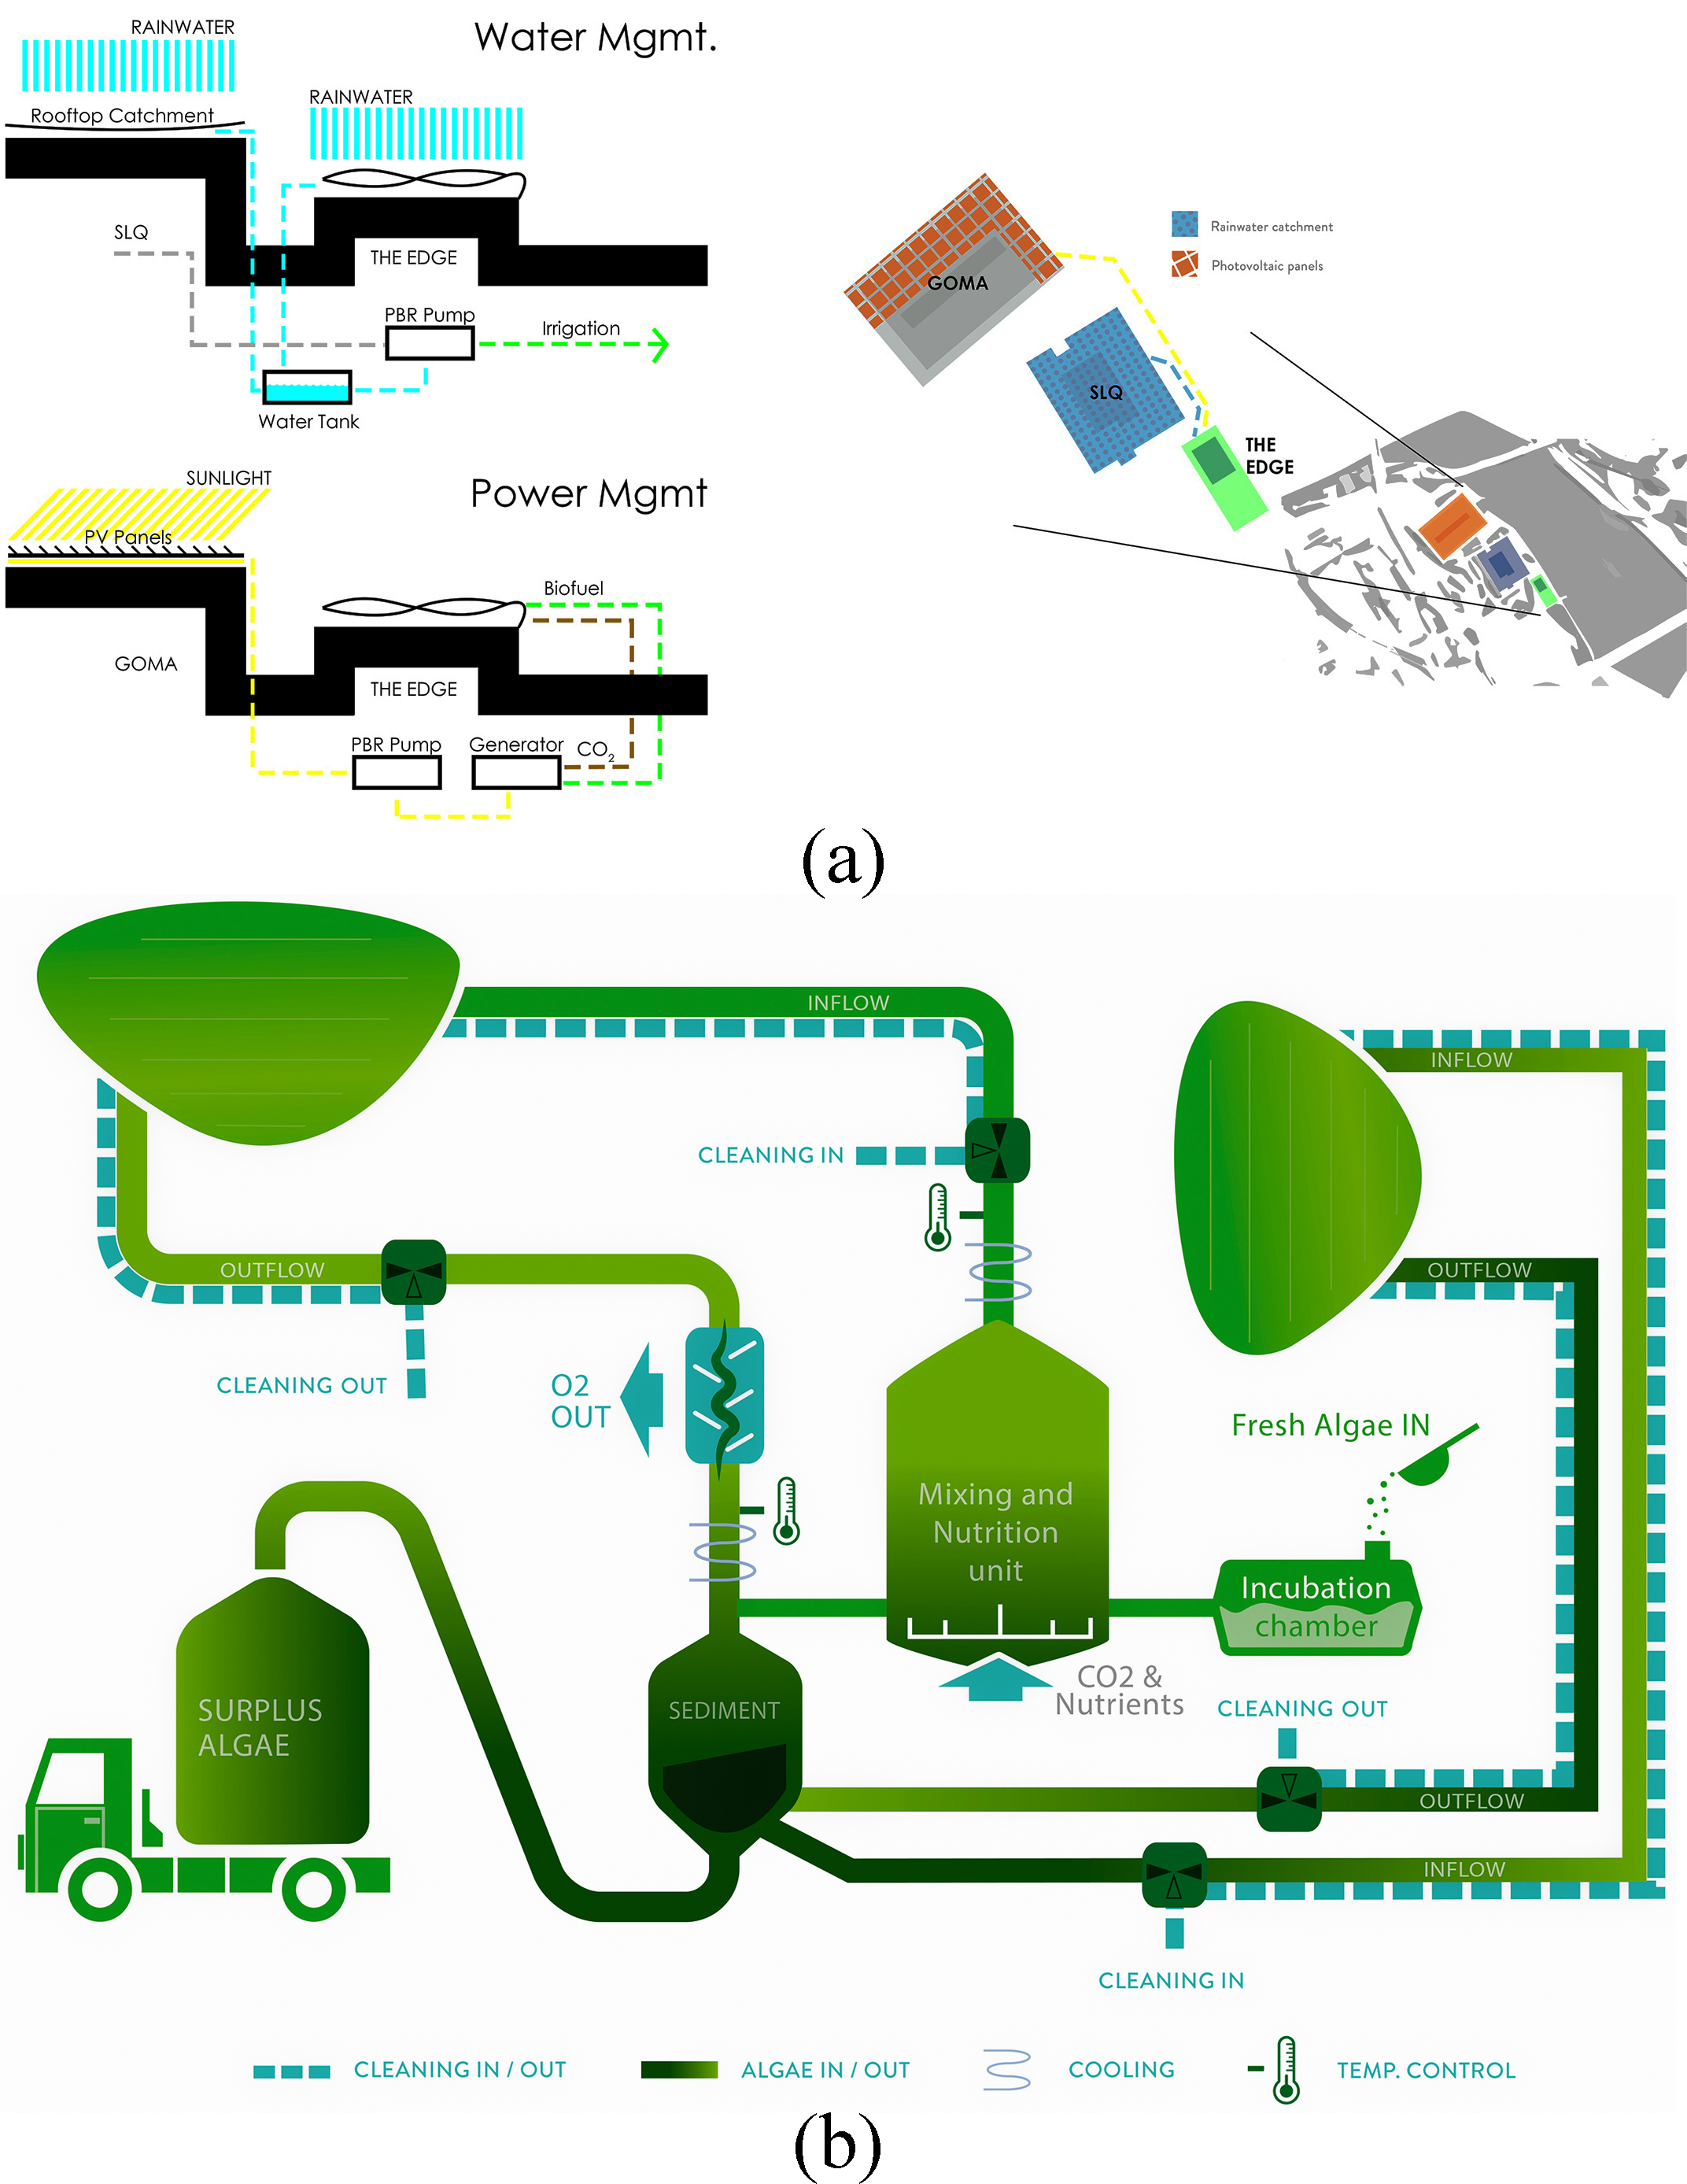 Concept of the microalgae cultivation system: schema of (a) the water management strategy and (b) of the power management strategy.